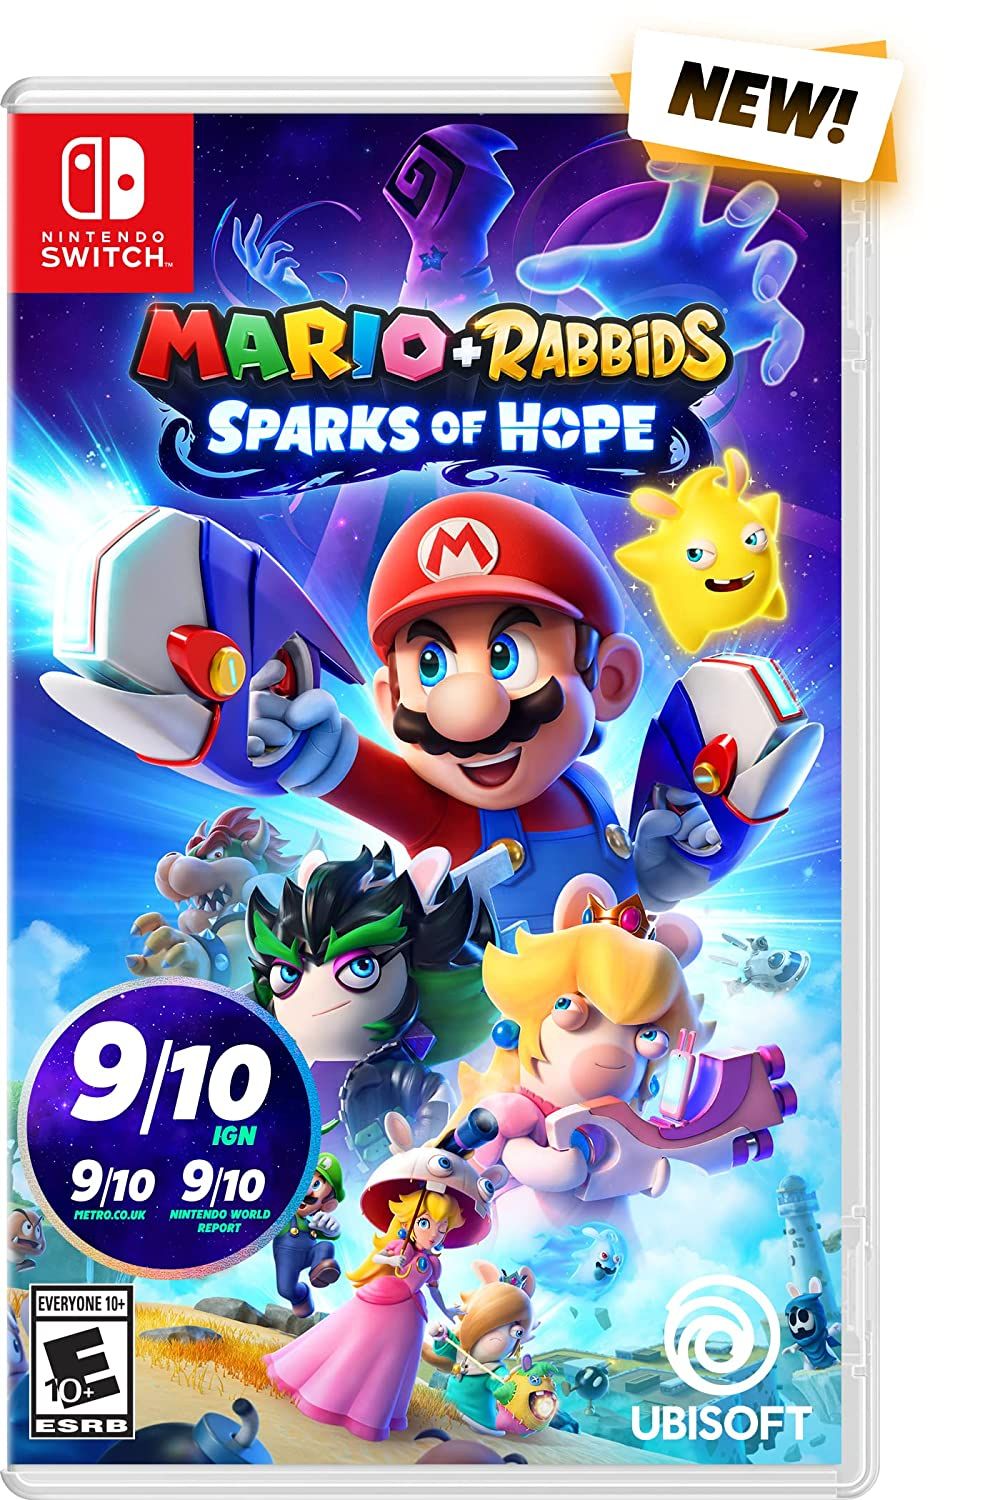 Mario + Rabbids Sparks of Hope Nintendo Switch case.